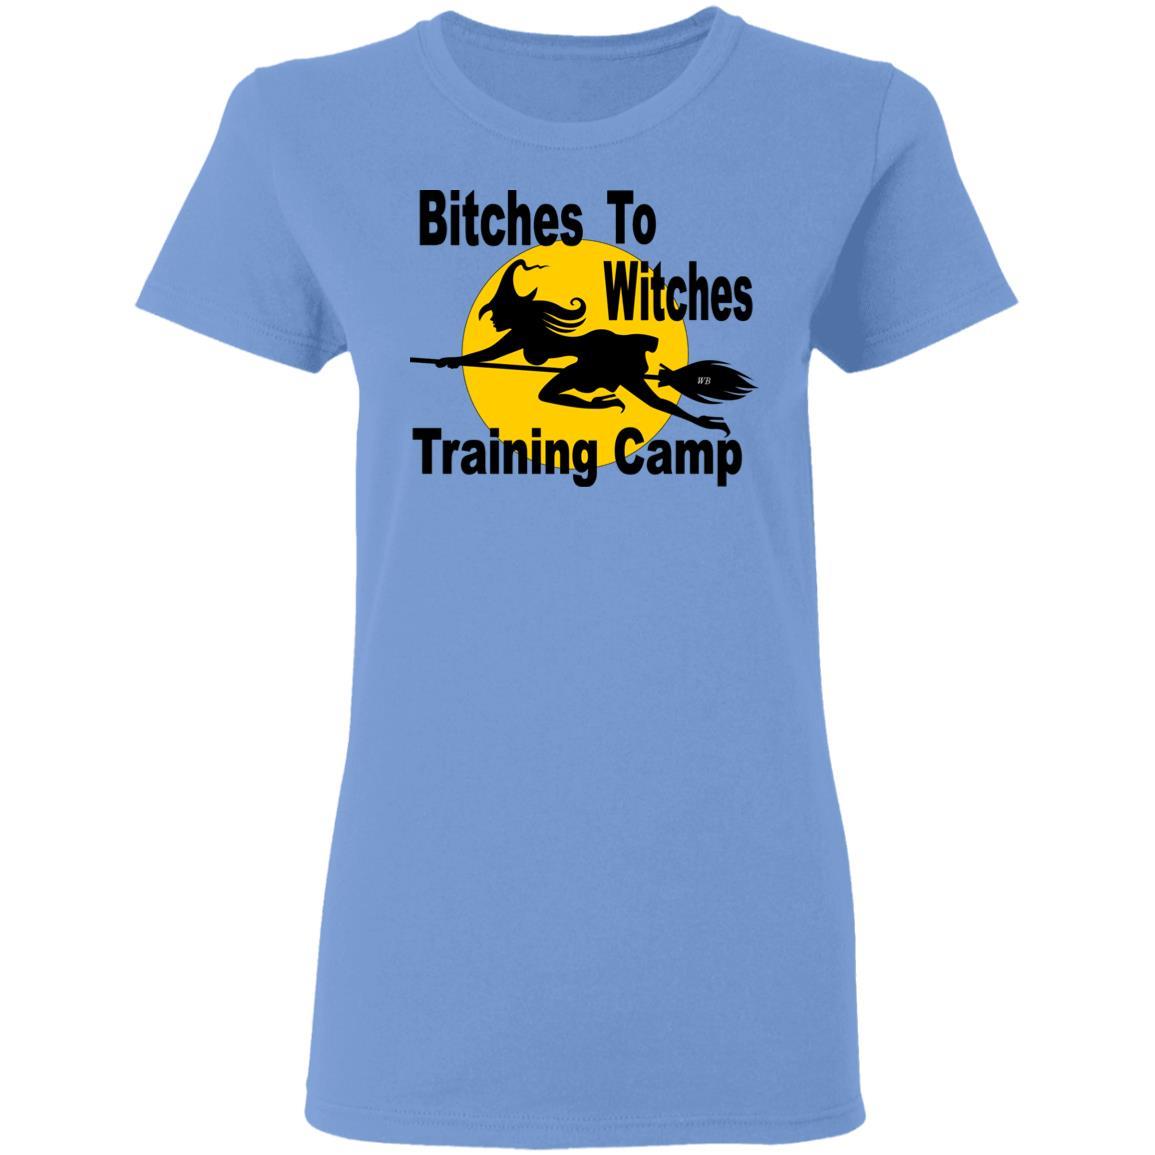 T-Shirts Carolina Blue / S WineyBitches.Co "Bitches To Witches Training Camp" Halloween Ladies' 5.3 oz. T-Shirt WineyBitchesCo